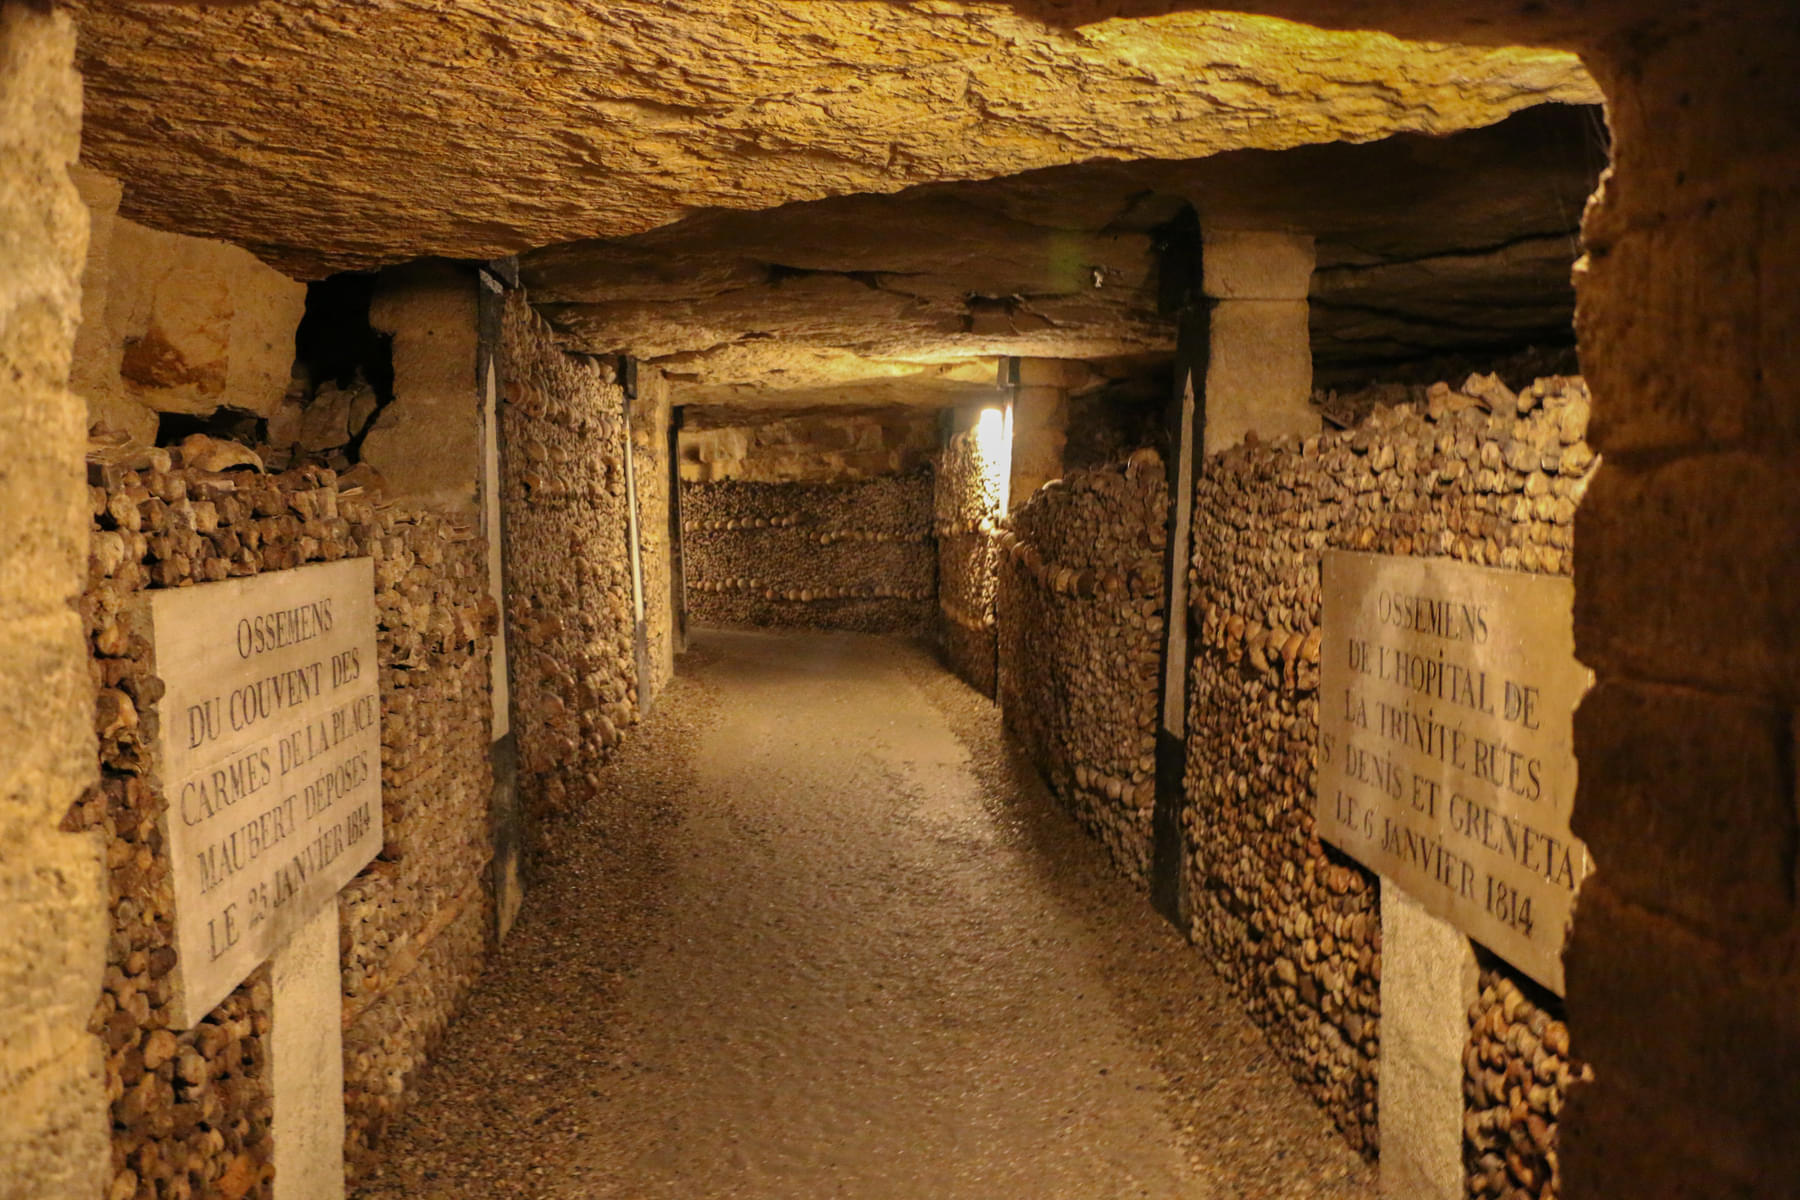 Witness the incredible and complex Catacombs, dug during the Middle Ages